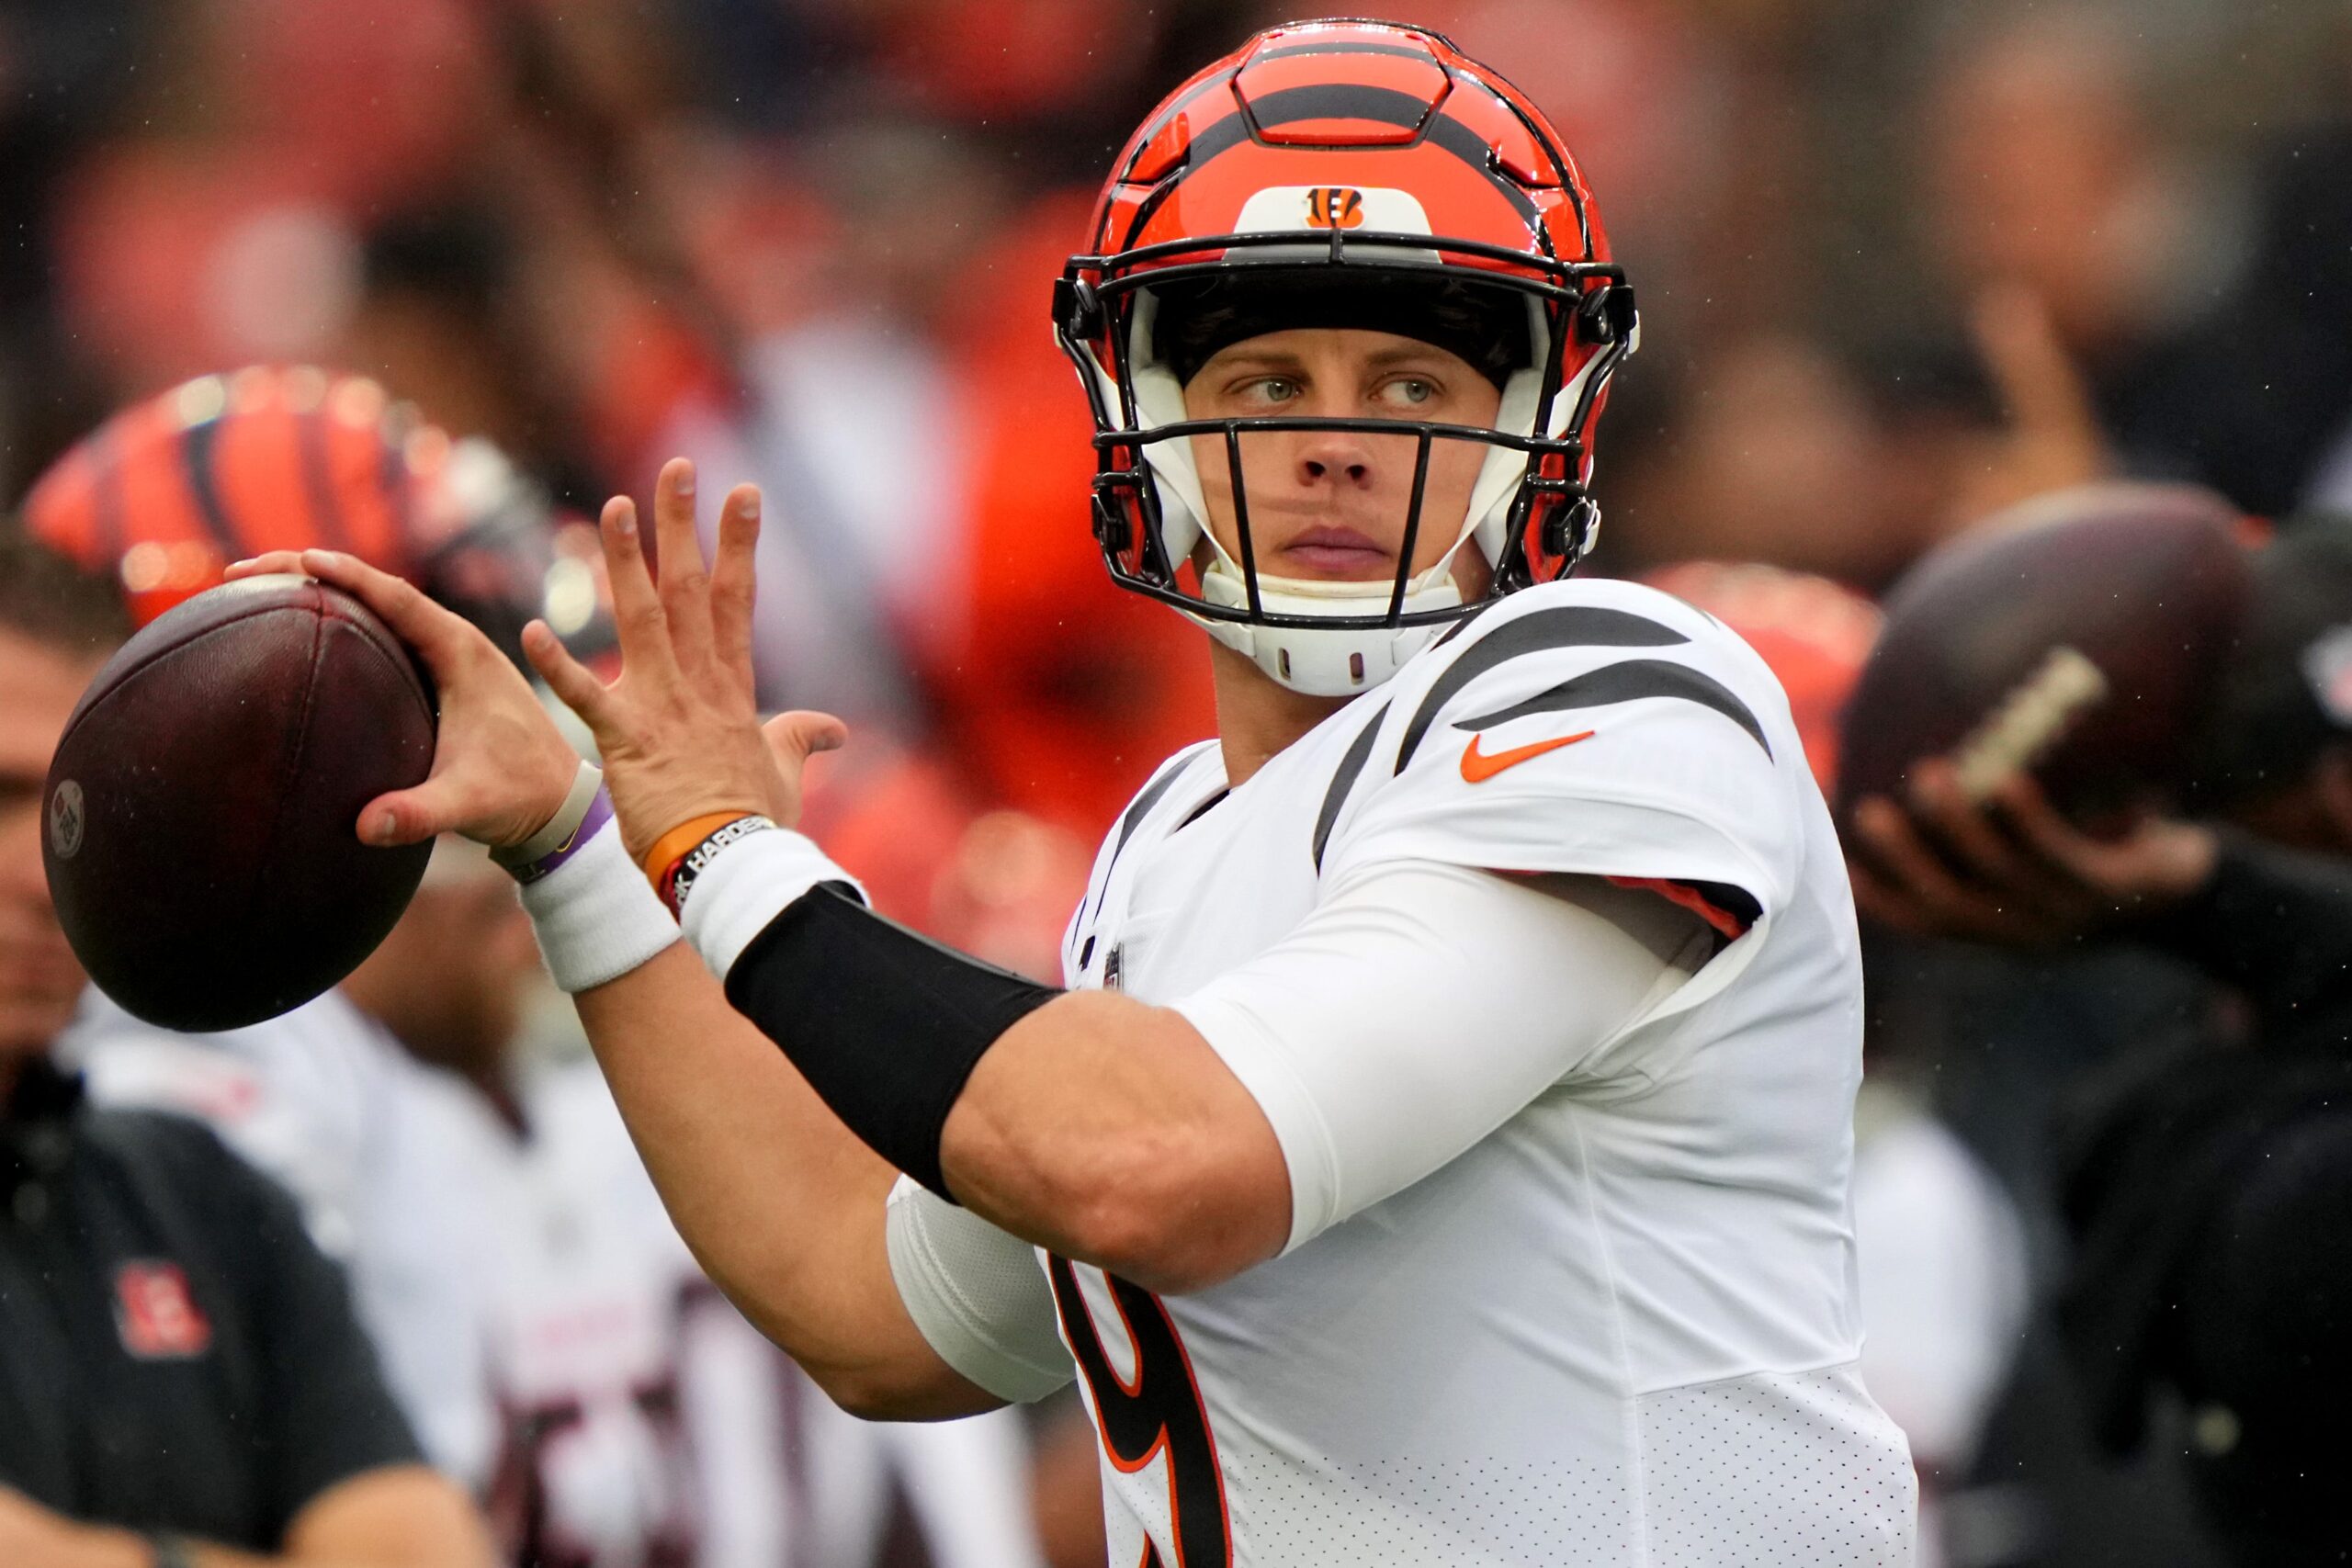 With QB Joe Burrow mobile again, the Bengals want to build